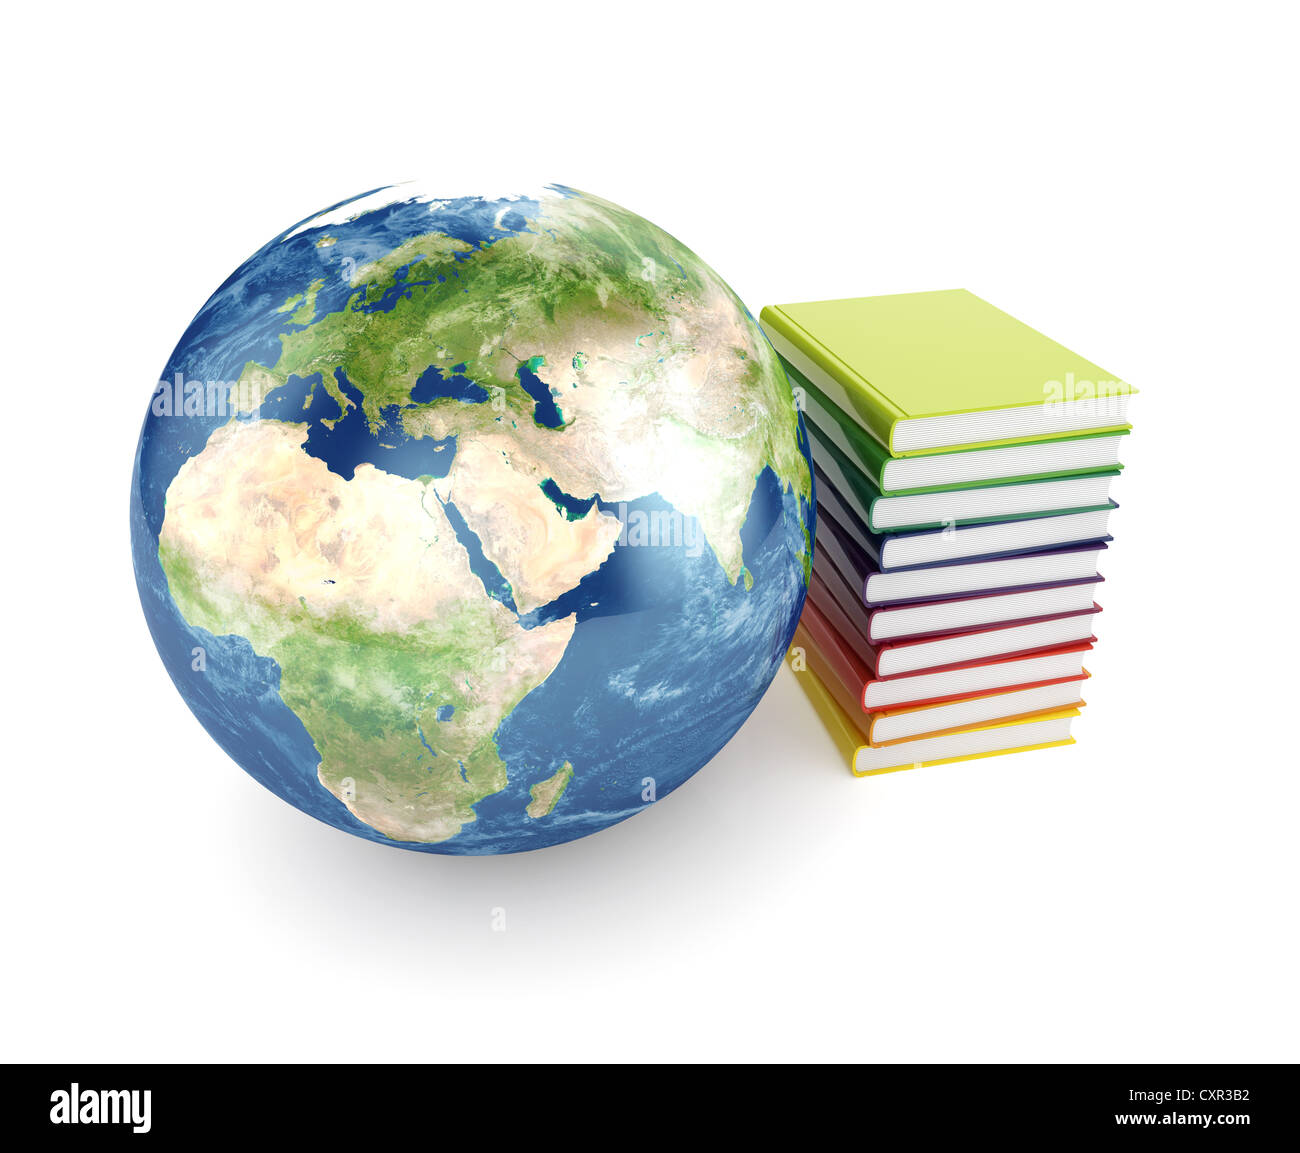 3d illustration of Earth planet and books over white Stock Photo